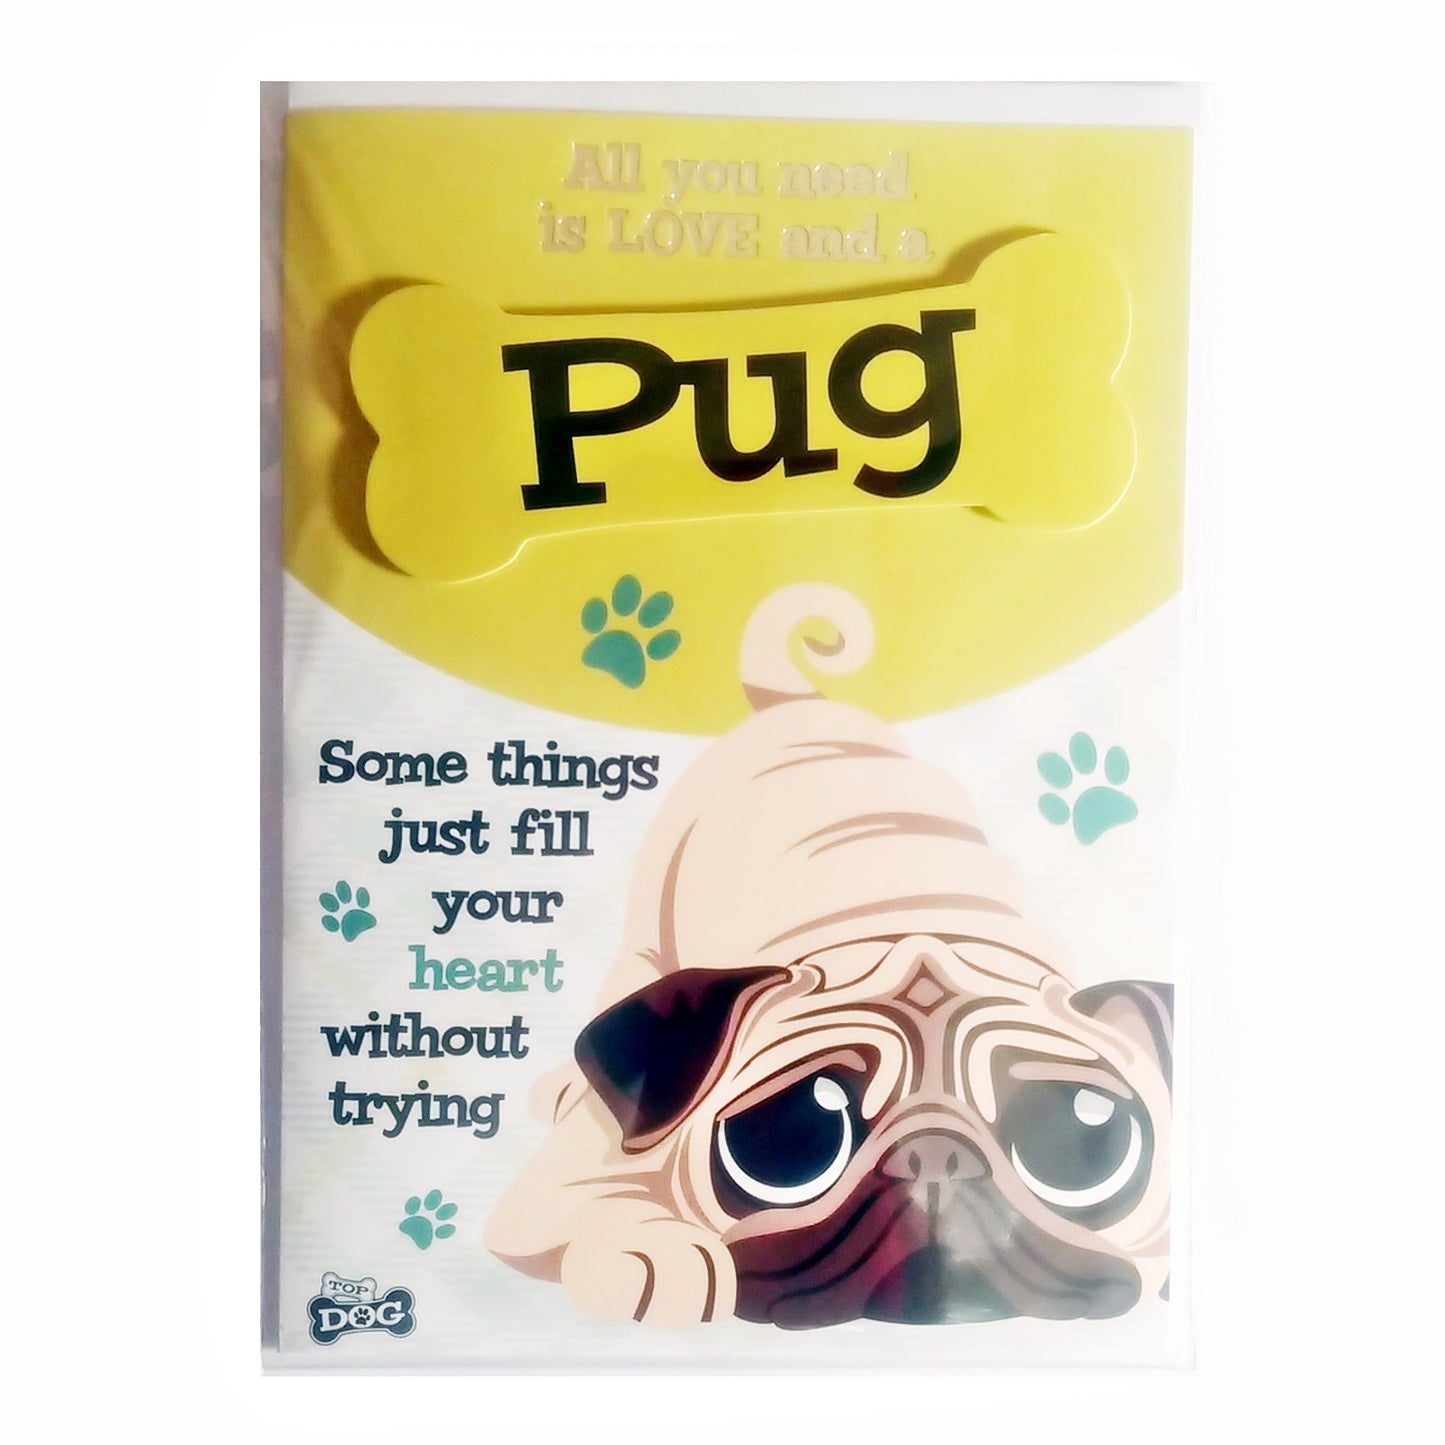 Wags & Whiskers Dog Greeting Card "Pug" by Paper Island